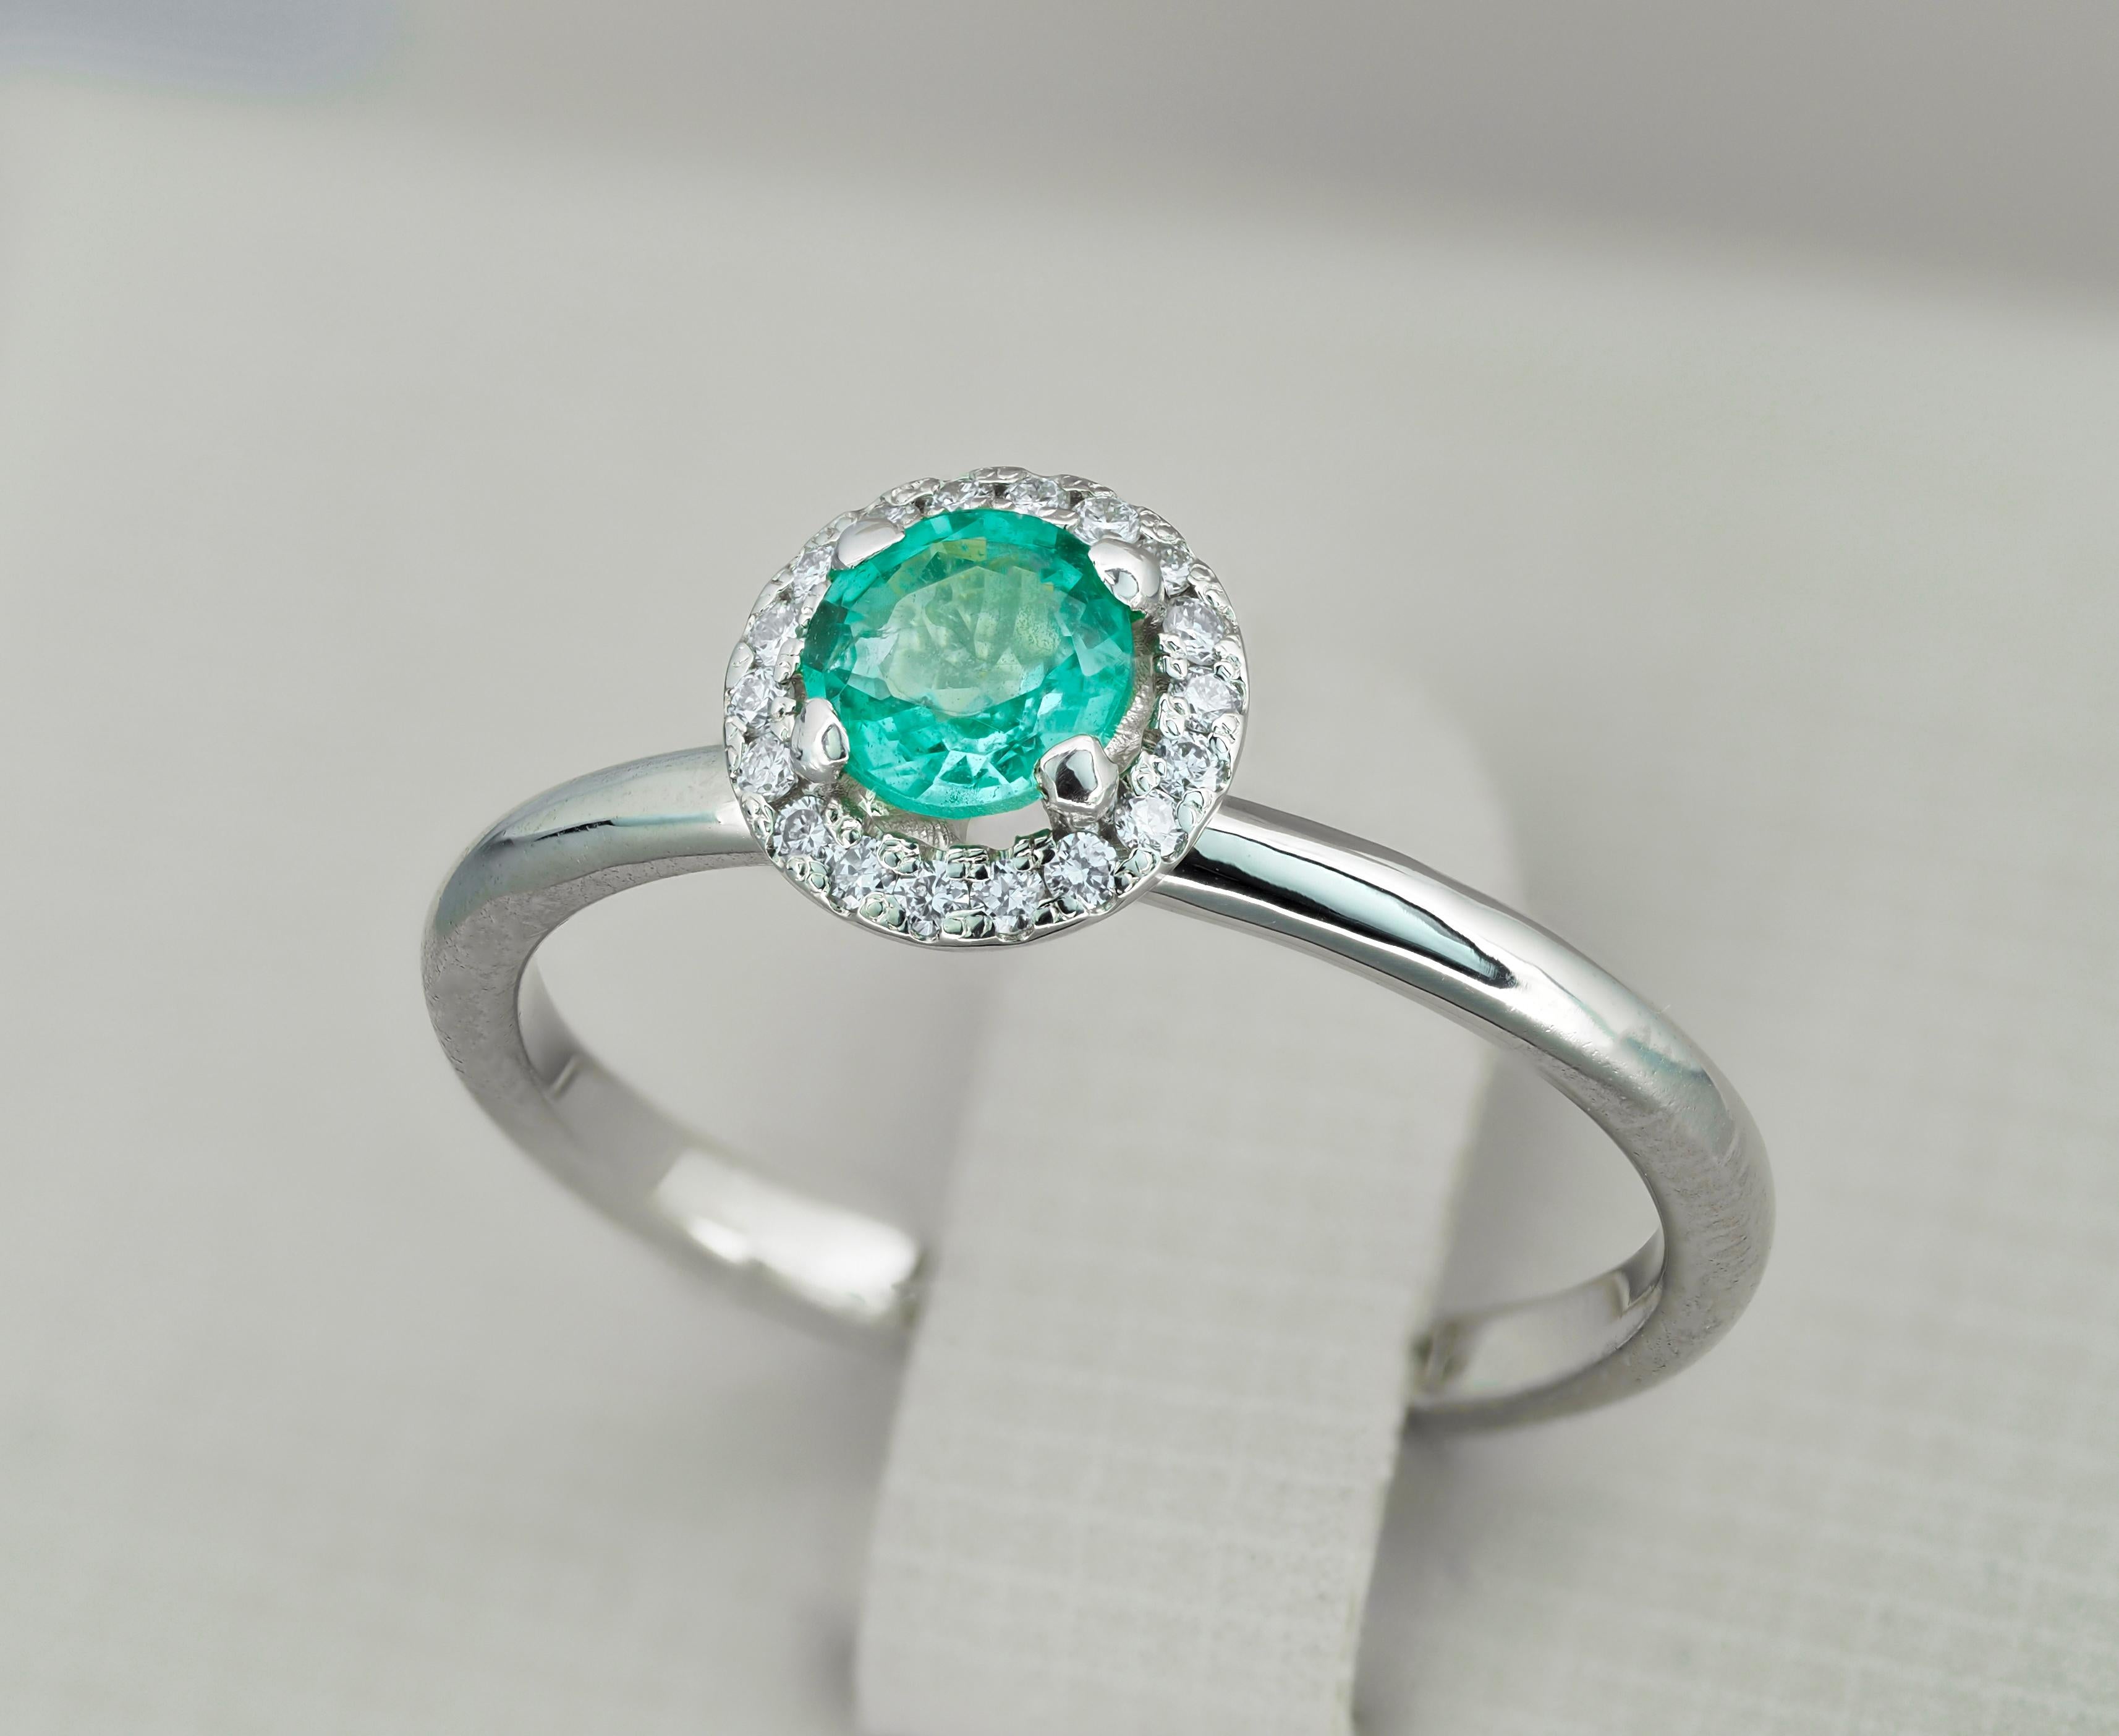 Modern 14k Gold Ring with Emerald and Diamonds, Emerald Halo Ring